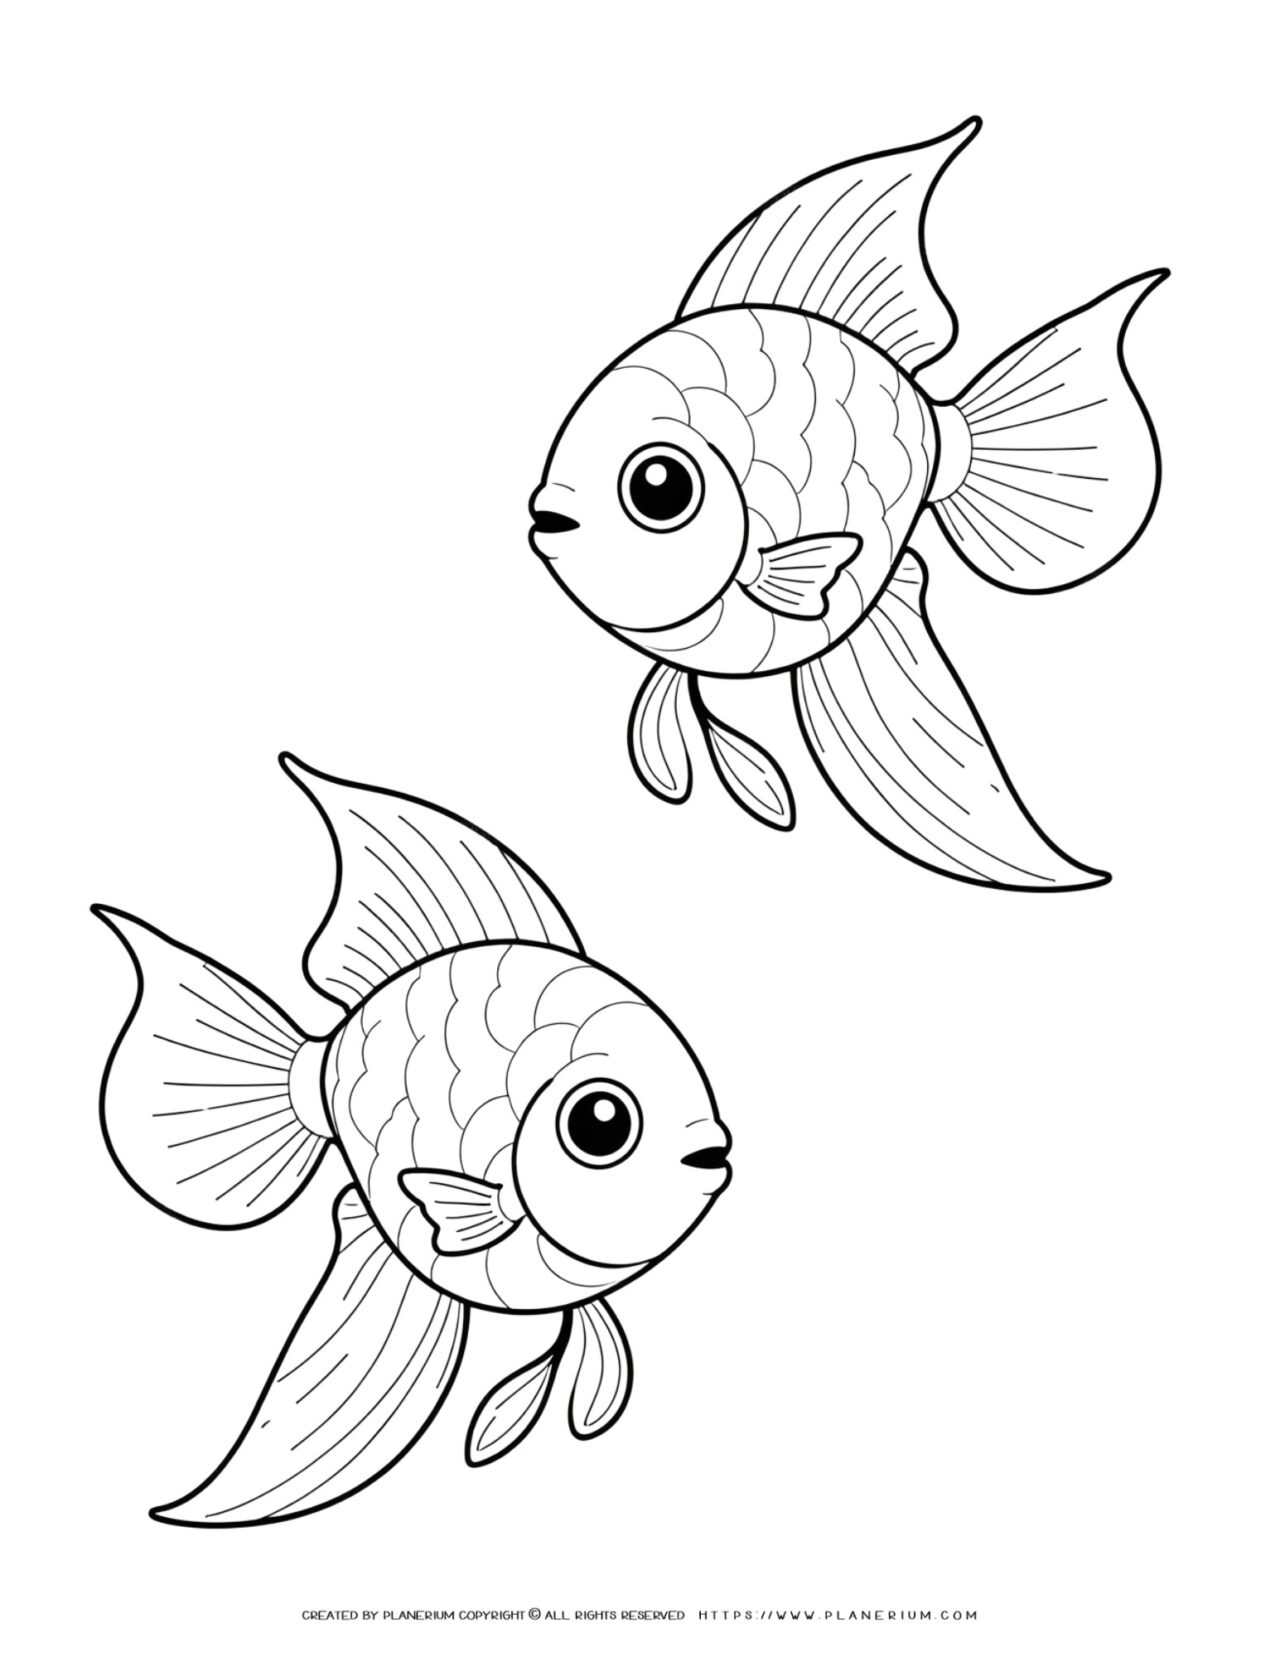 Two-cartoon-goldfish-coloring-page-illustration